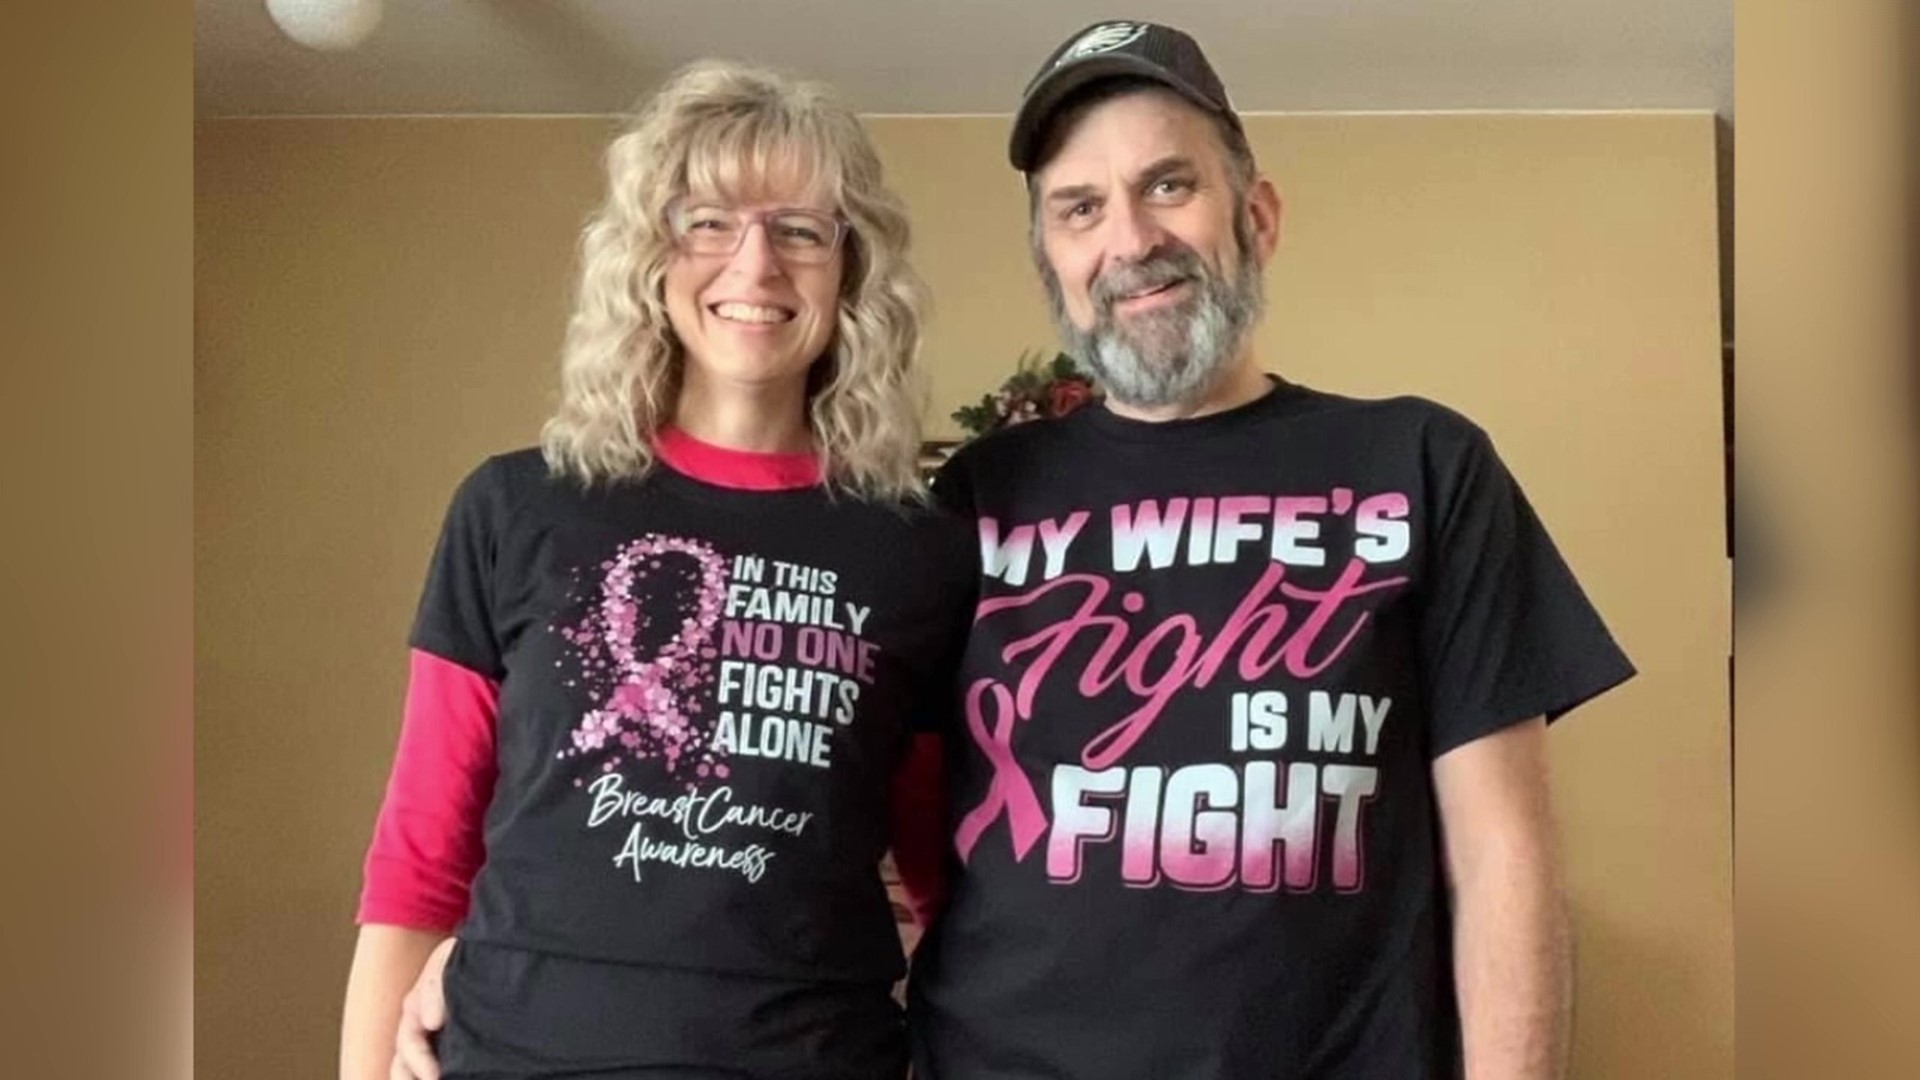 A courageous woman from Schuylkill County kept her footing when faced with a cancer diagnosis and is ready to take on a new uphill climb.